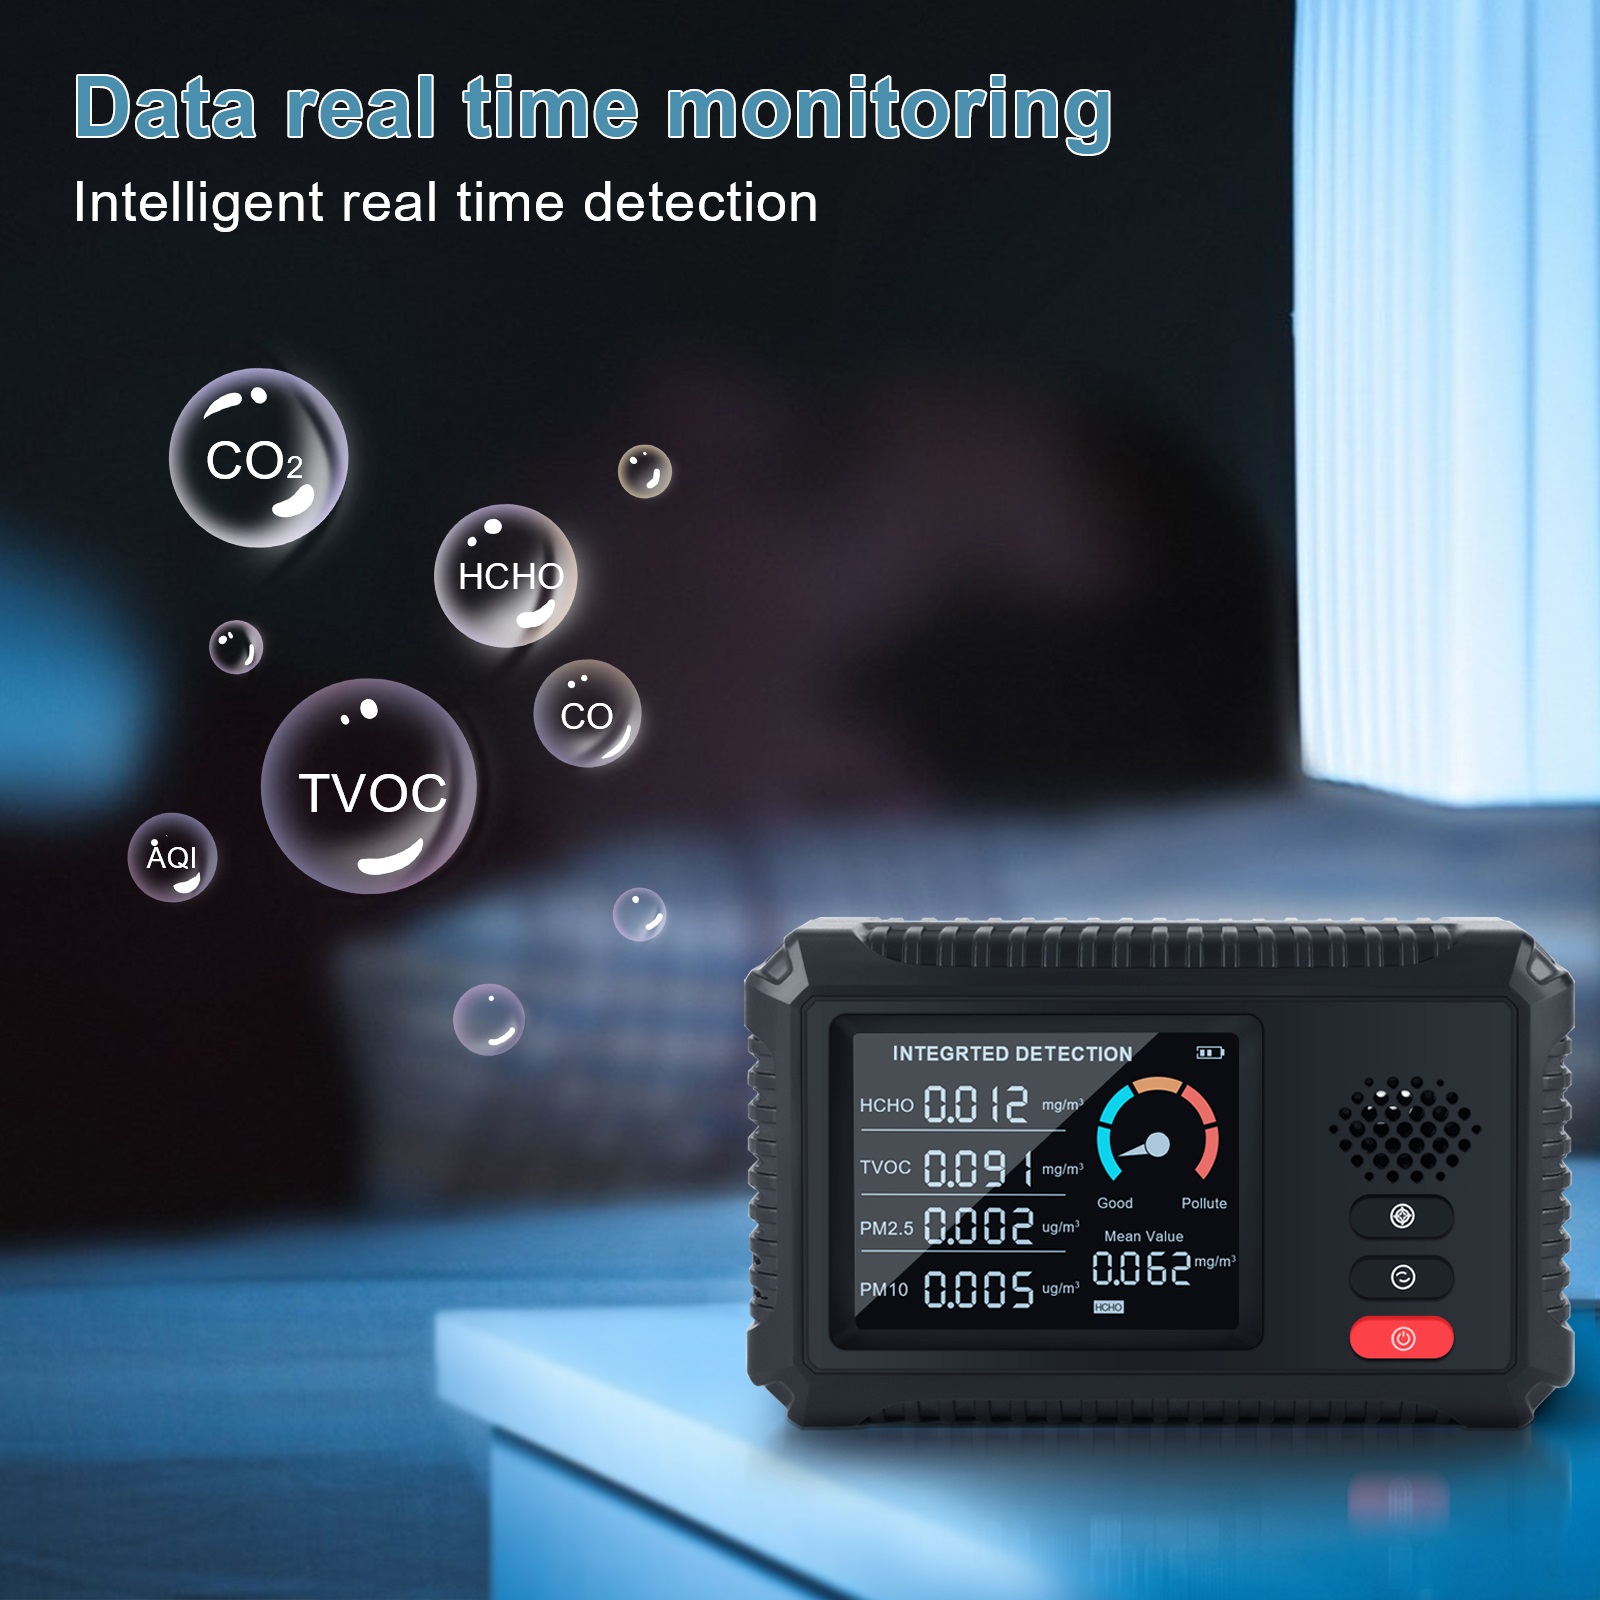 HCHOTVOCPM25PM10-Tester-Real-Time-Data-Monitoring-Multifunctional-Air-Quality-Monitor-Gas-Analyzer-1892301-2